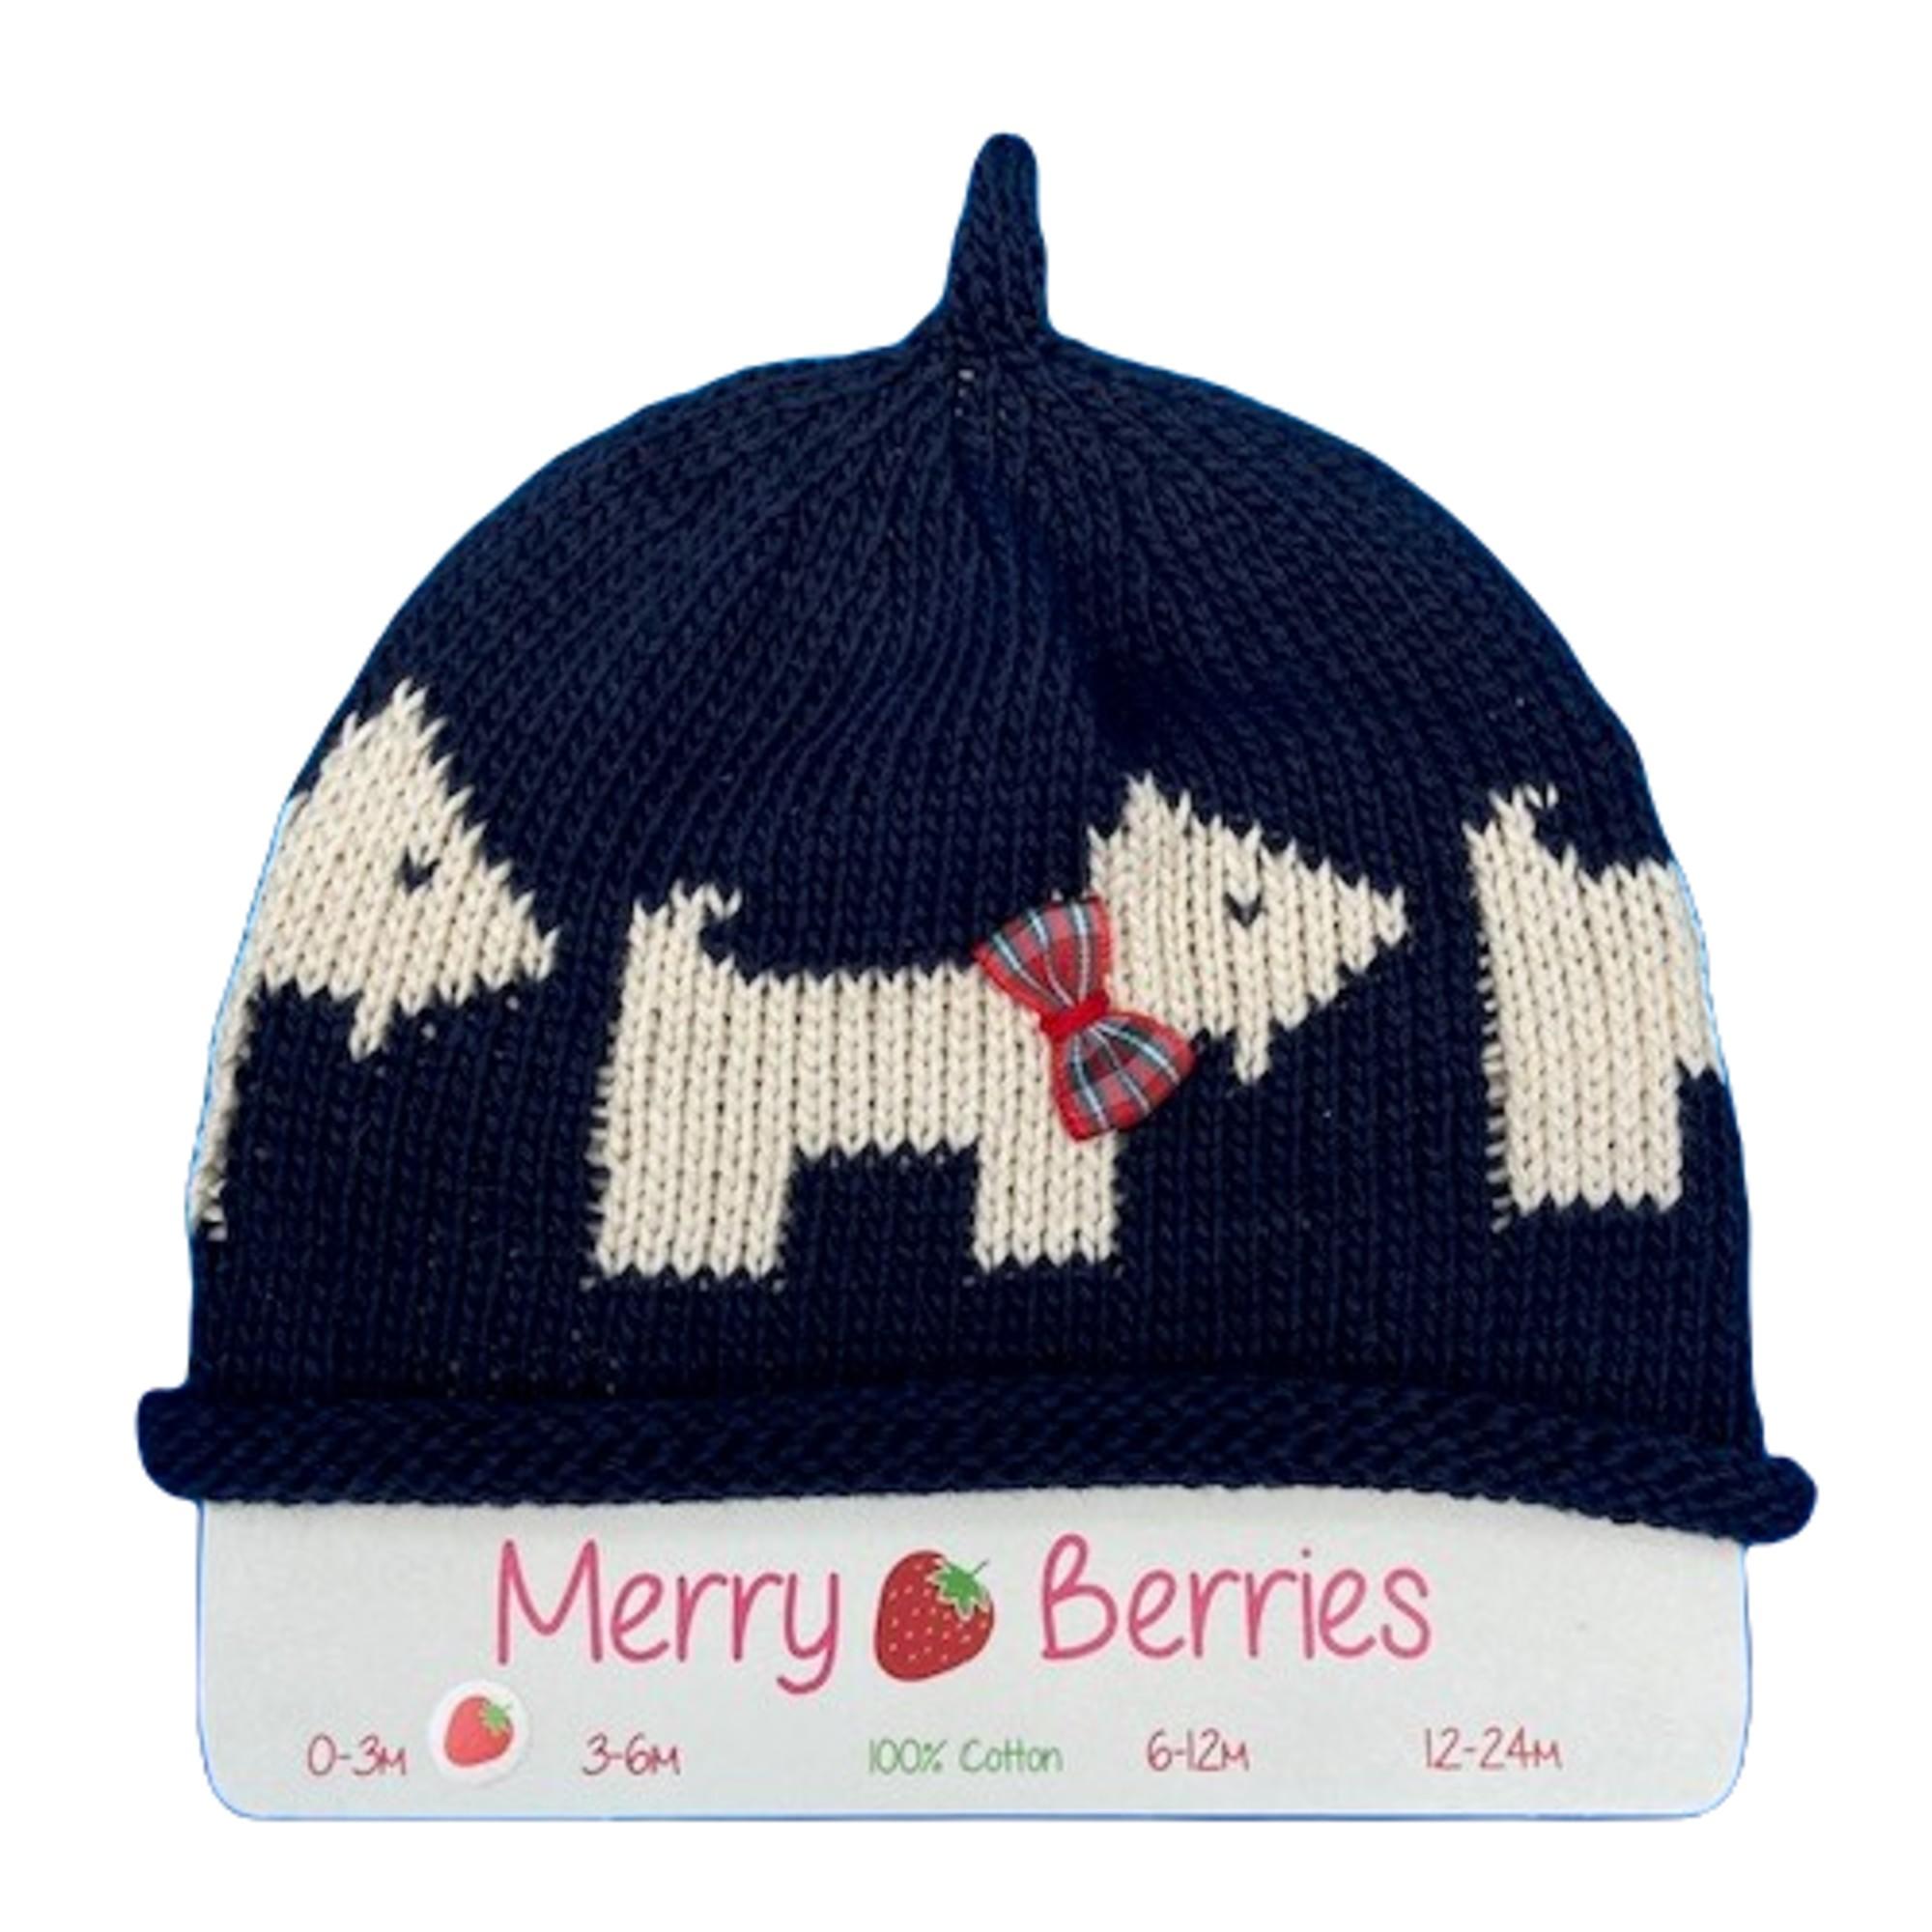 Navy cream Scottie knitted baby hat. Available in 4 sizes- 0-3 months, 3-6 months, 6-12 months and 12-24 months. Knitted in the UK by Merry Berries in 100% cotton.